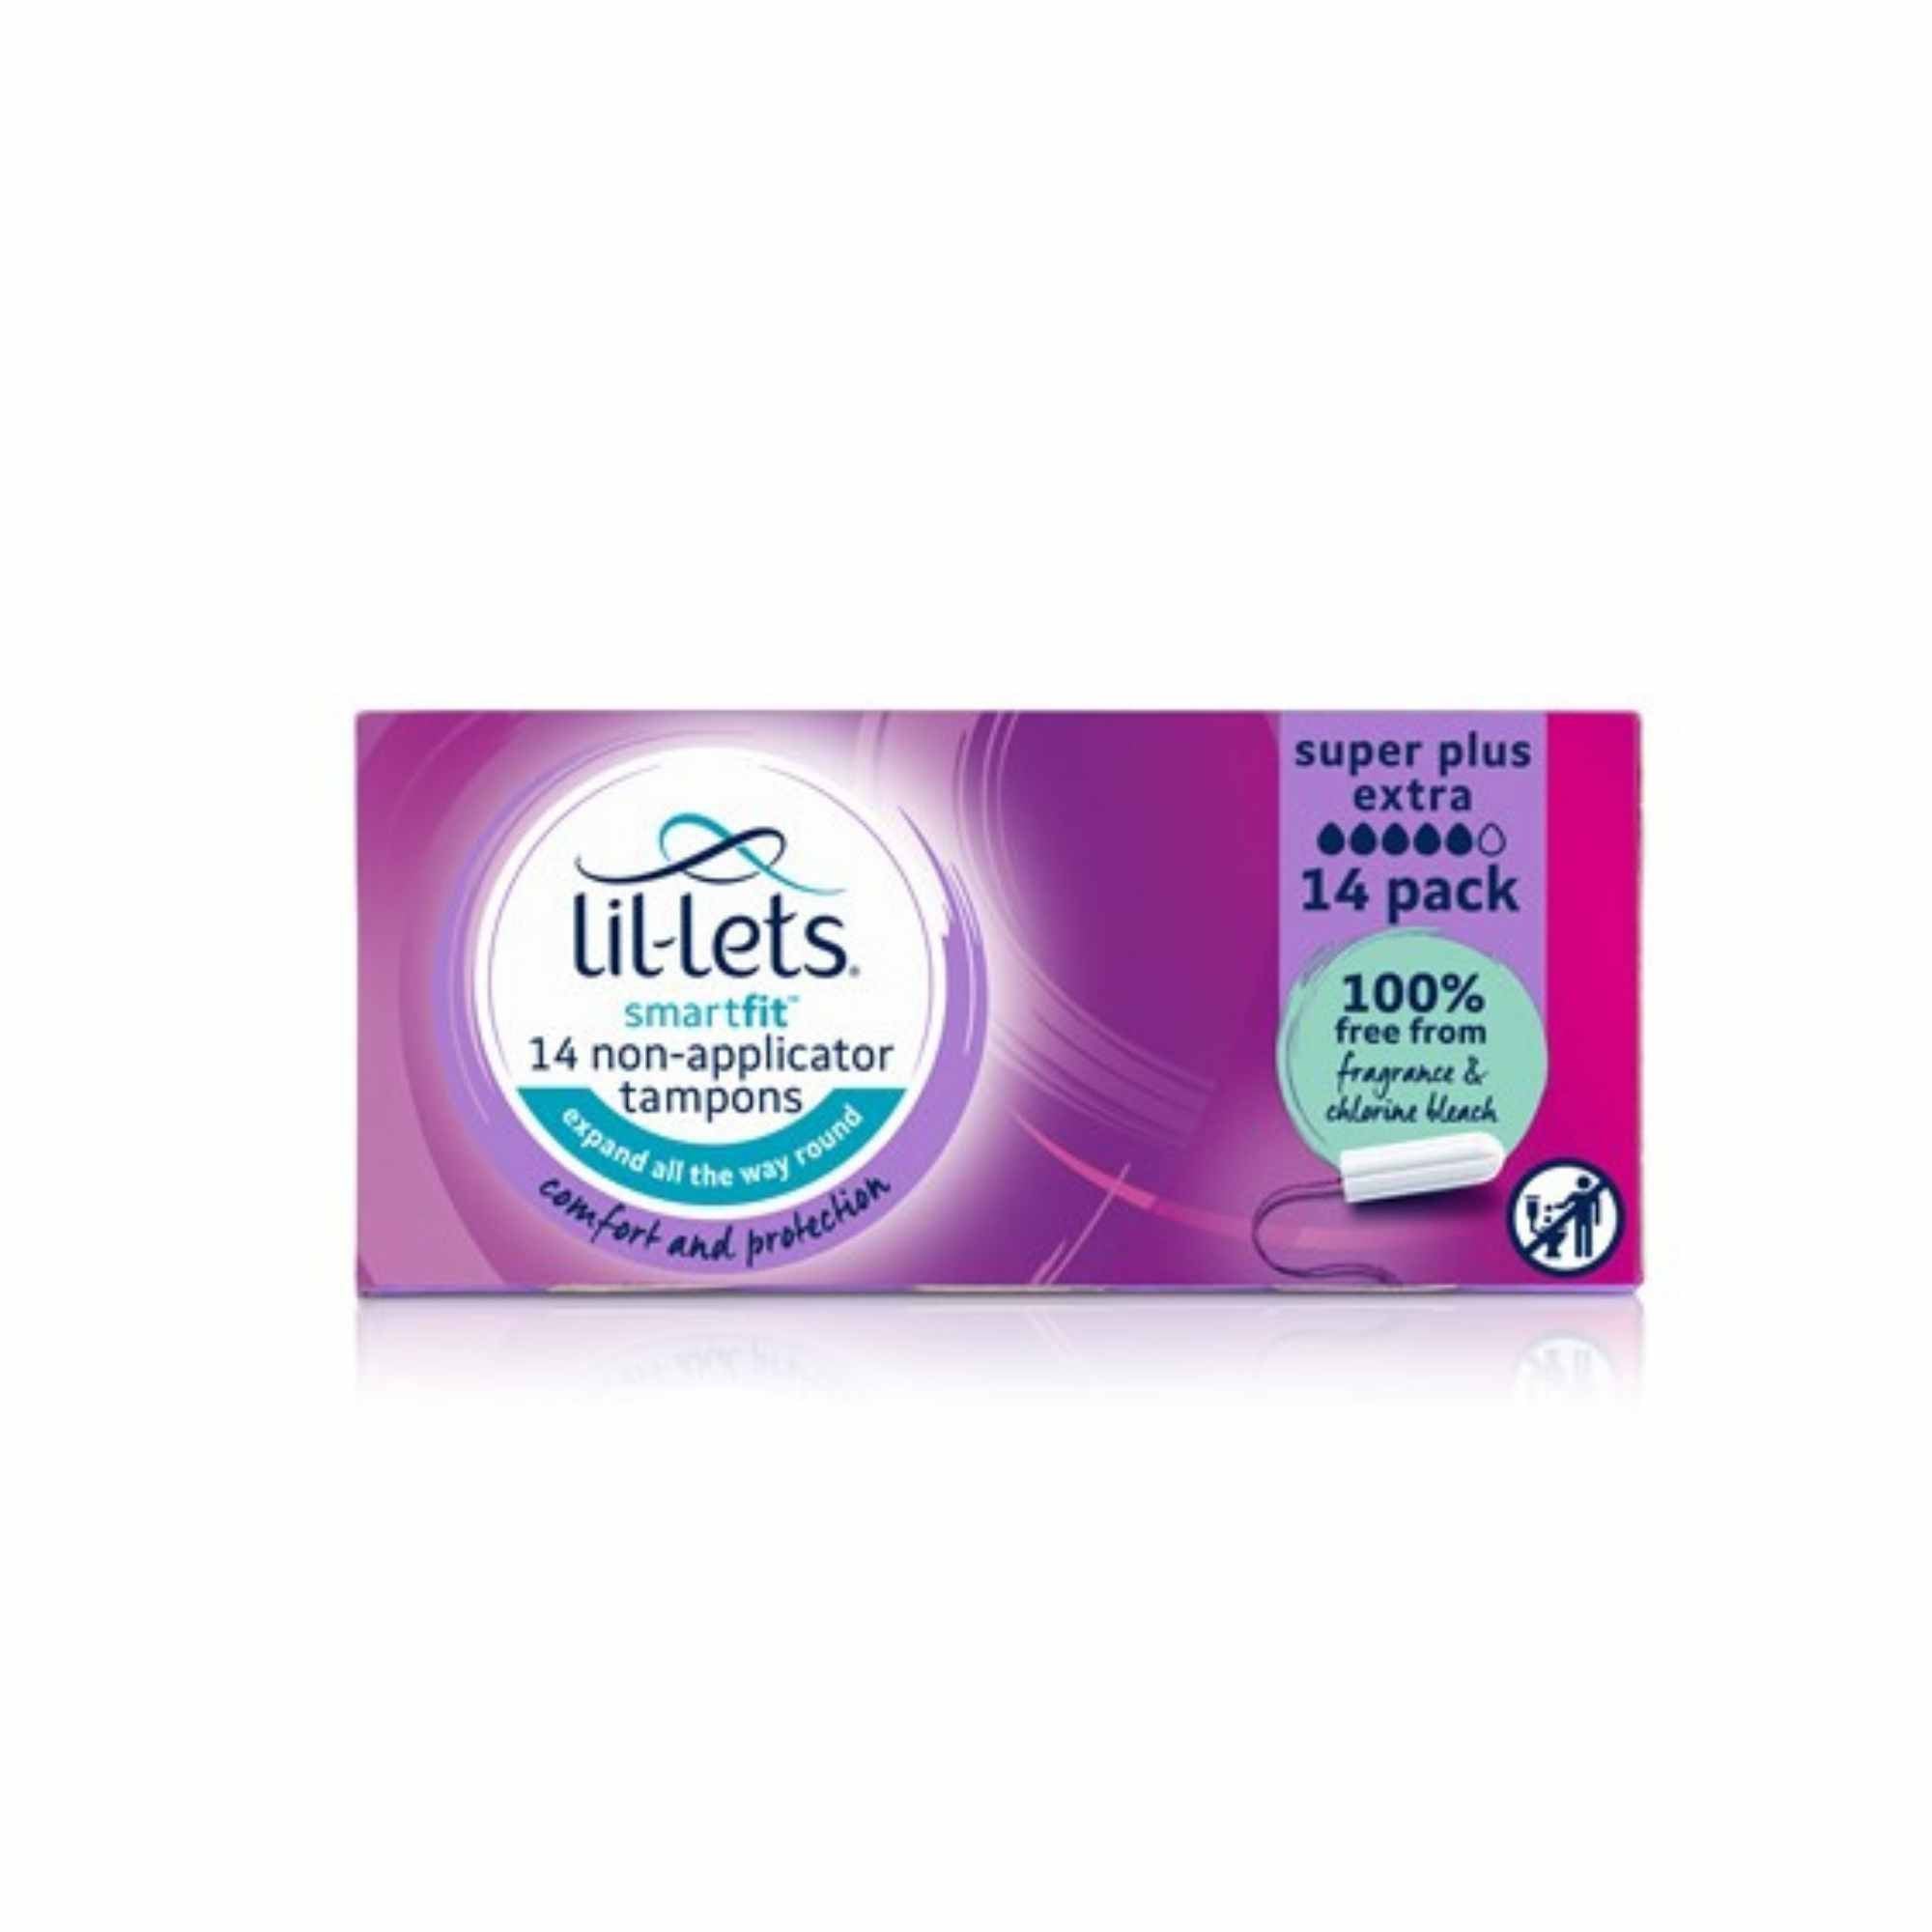 Lil-Lets Extra Tampons - Super Plus